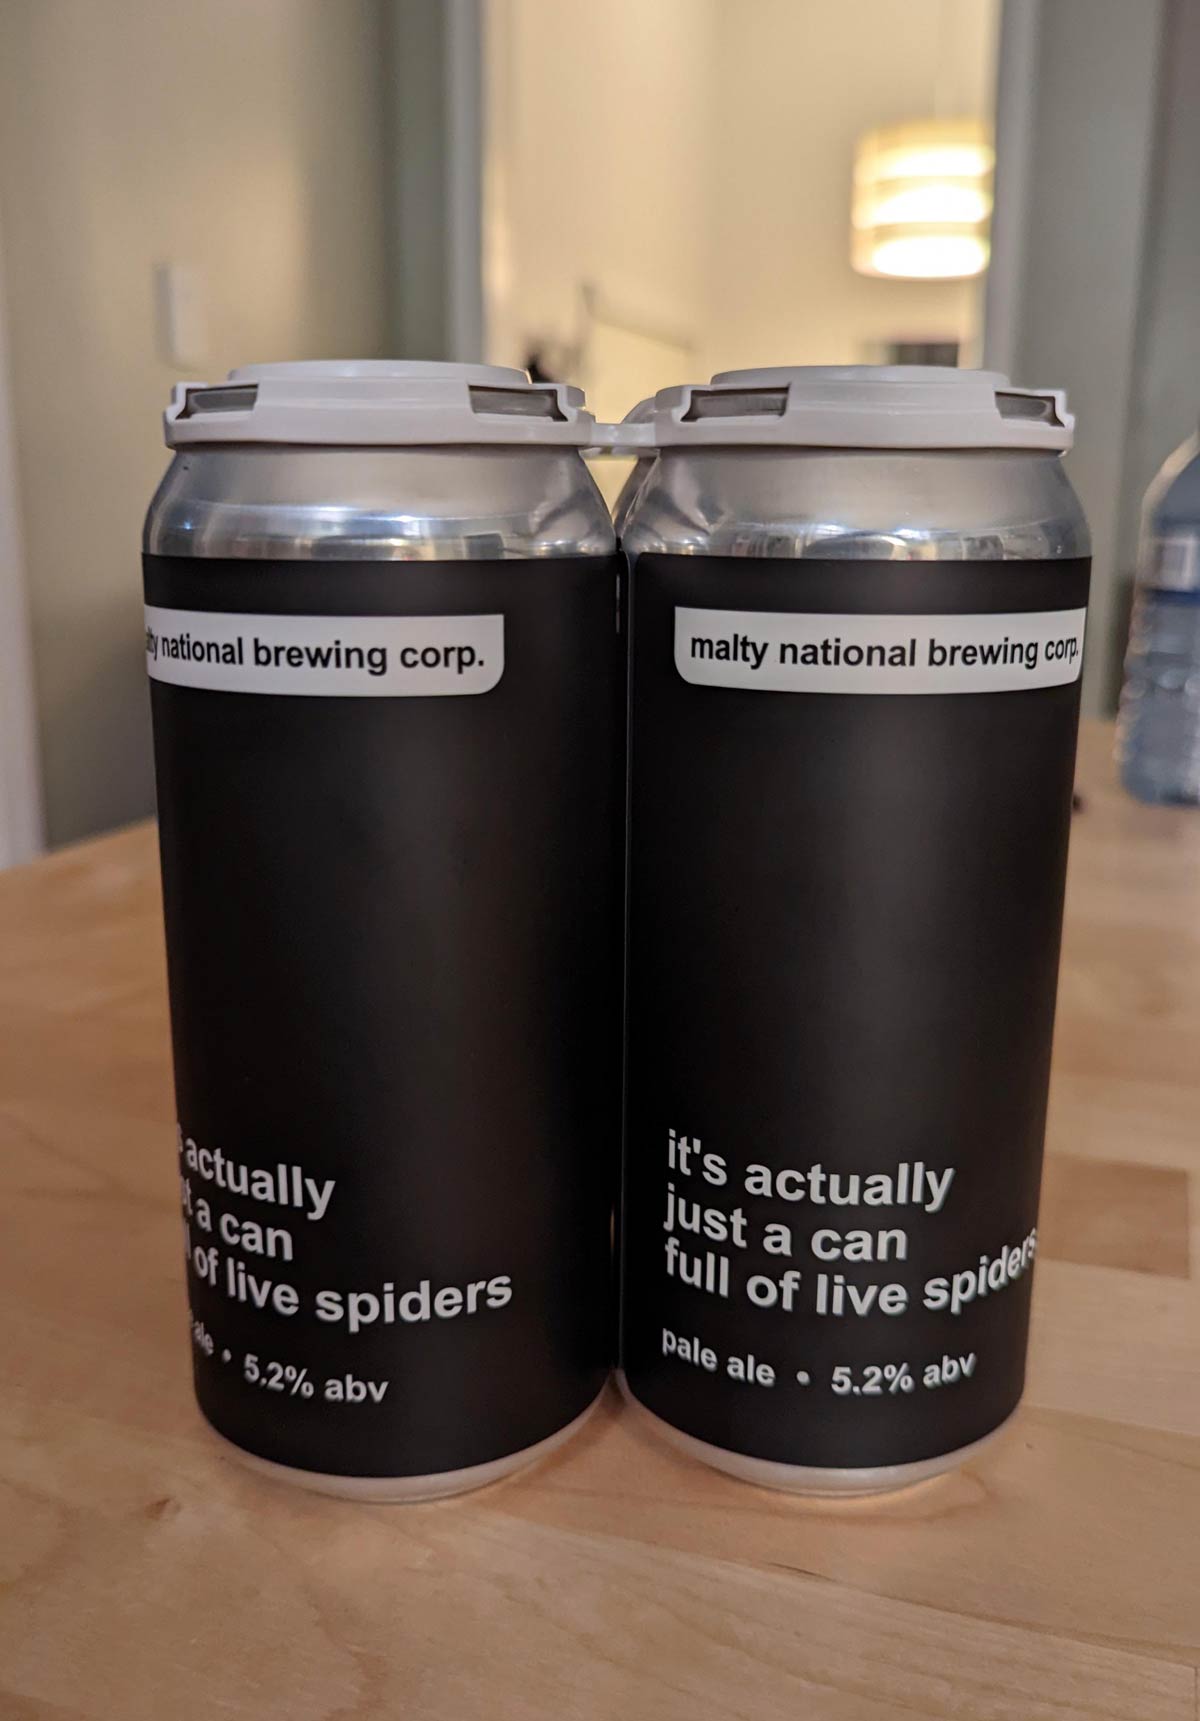 Local brewery nails October marketing